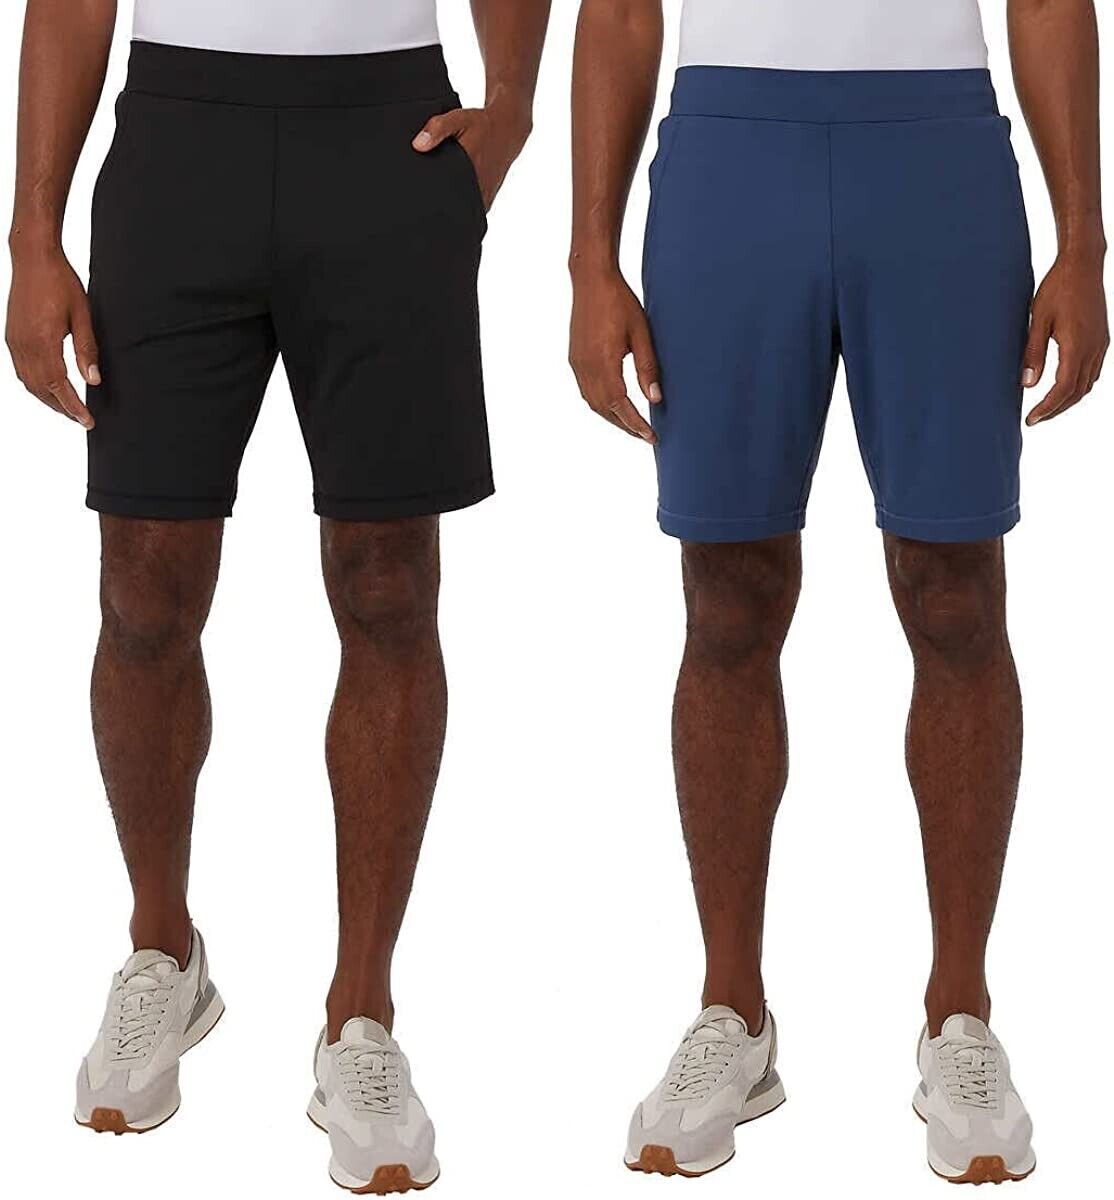 32° Degrees Cool Performance Active Short 2Pk XXL Black/Blue Stretch Breathable